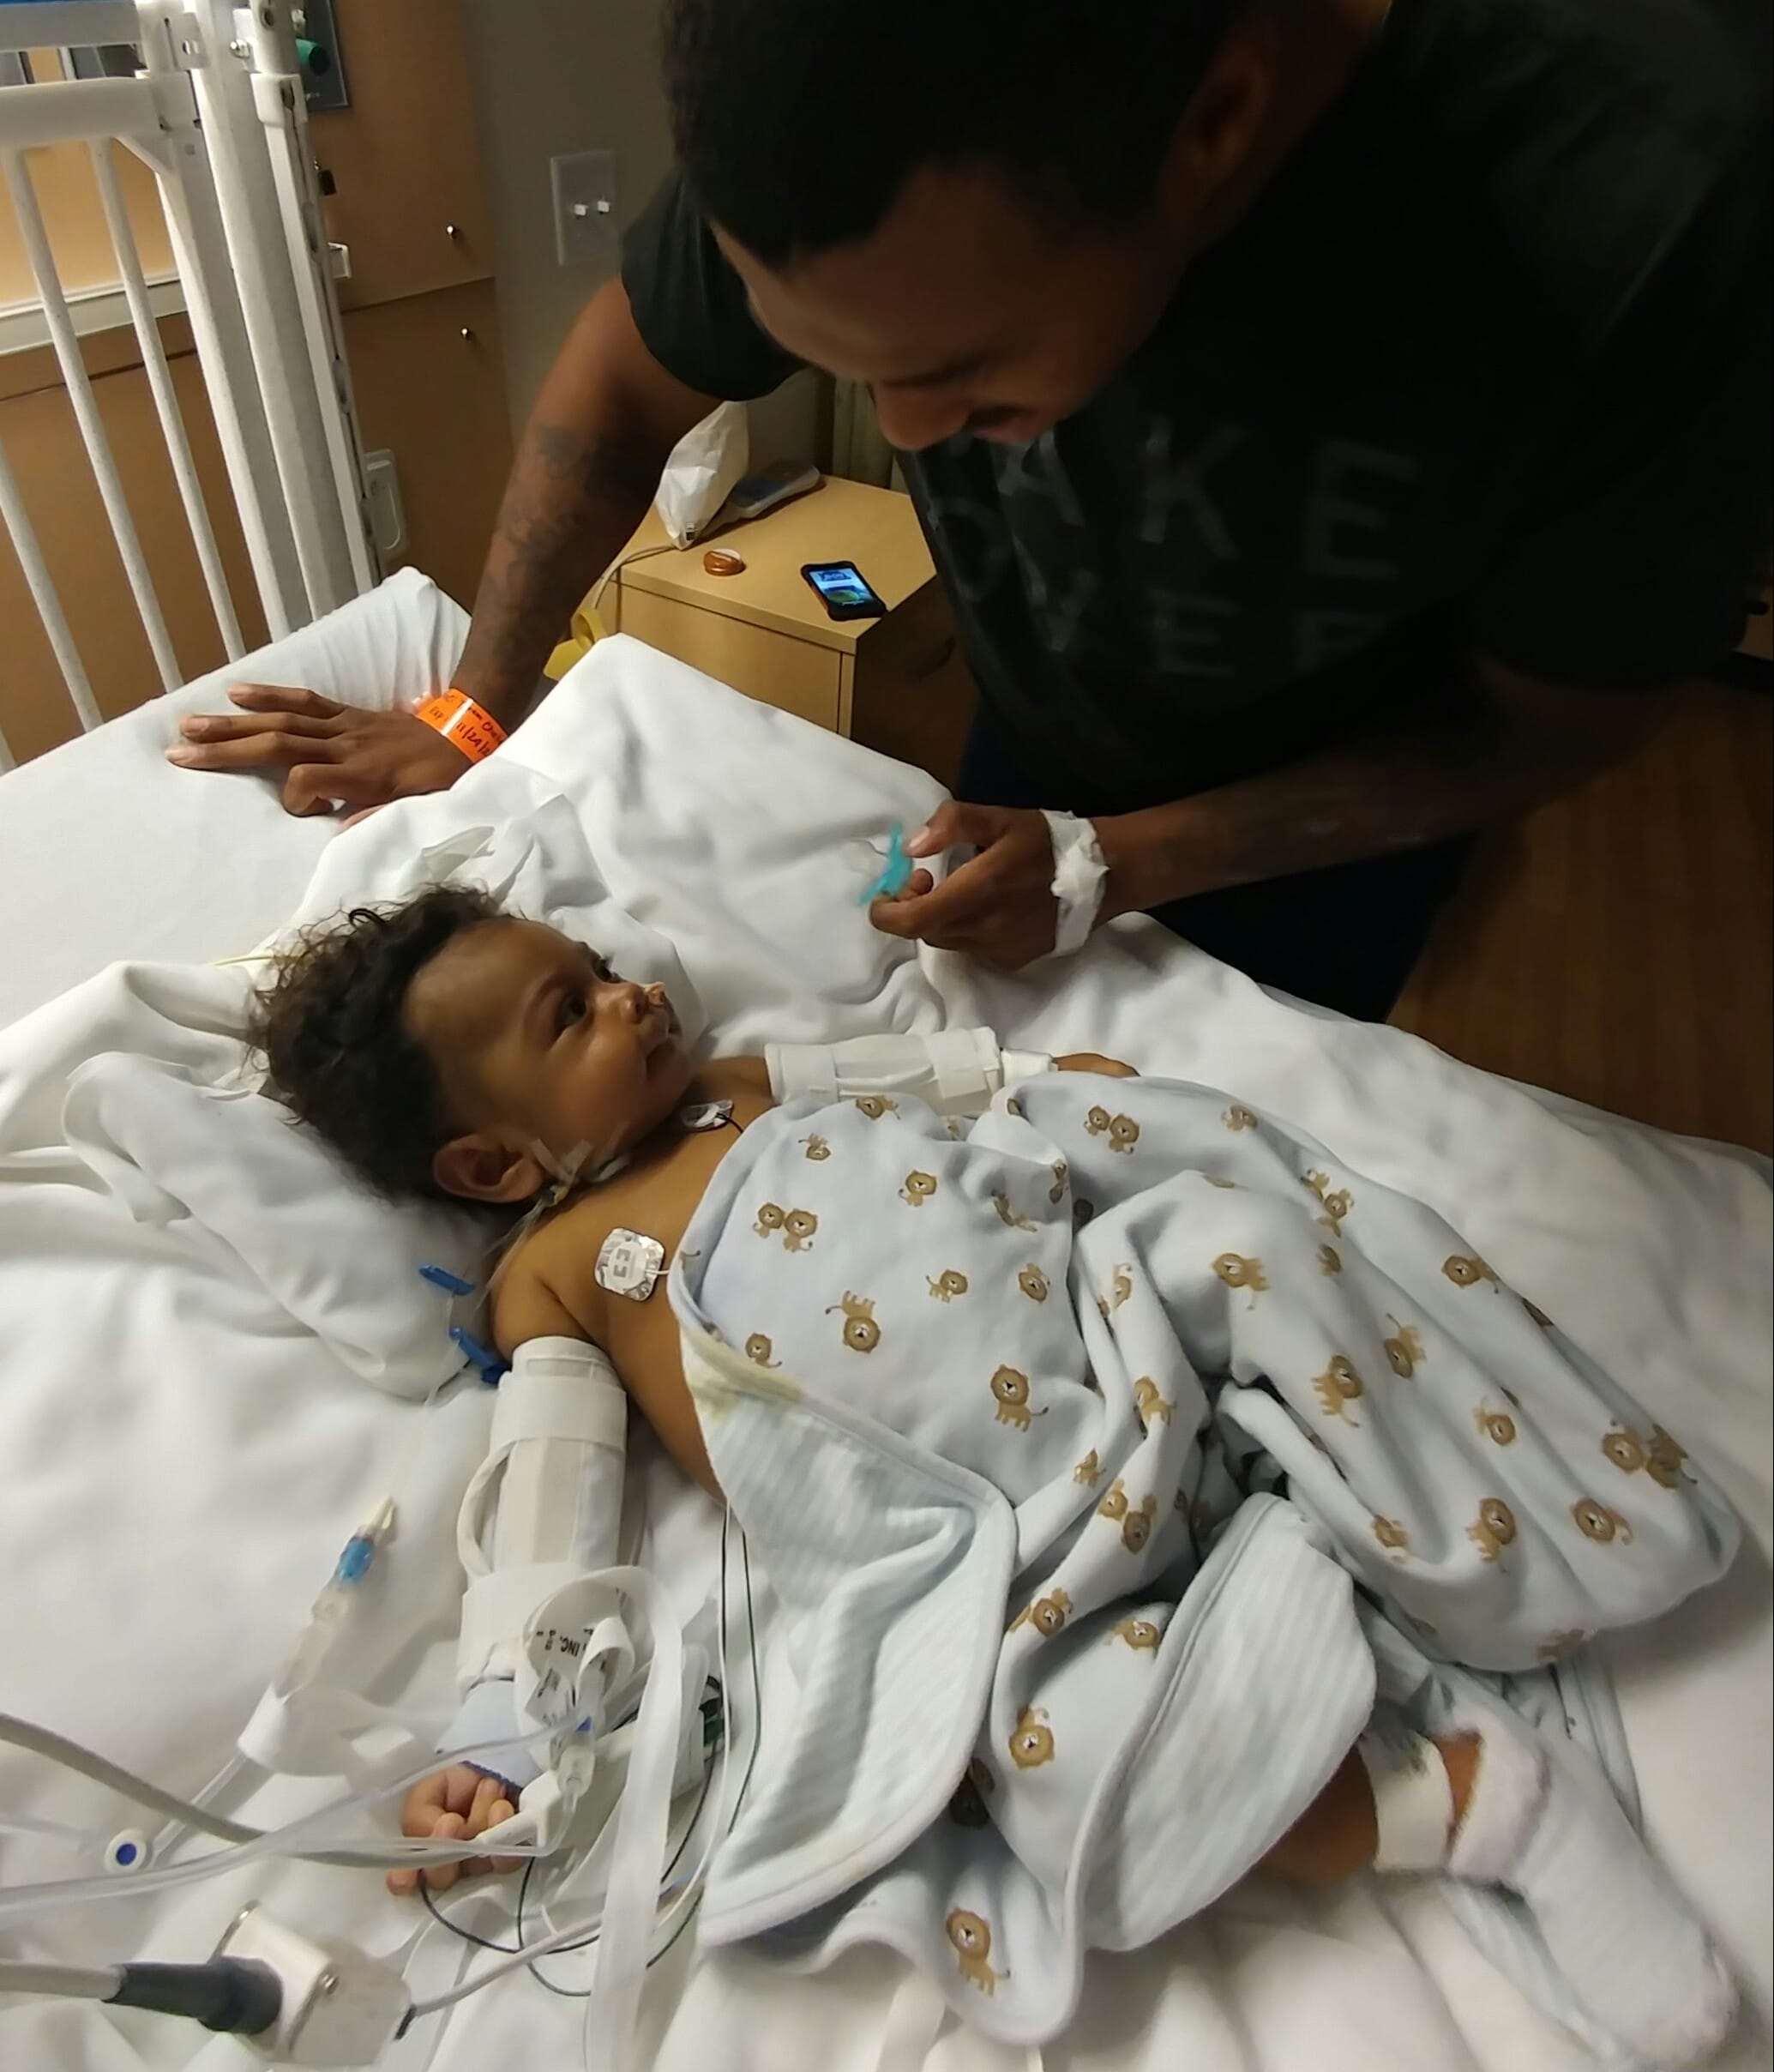 Dejon Daniels sees his son Donovan for the first time since the transplant.